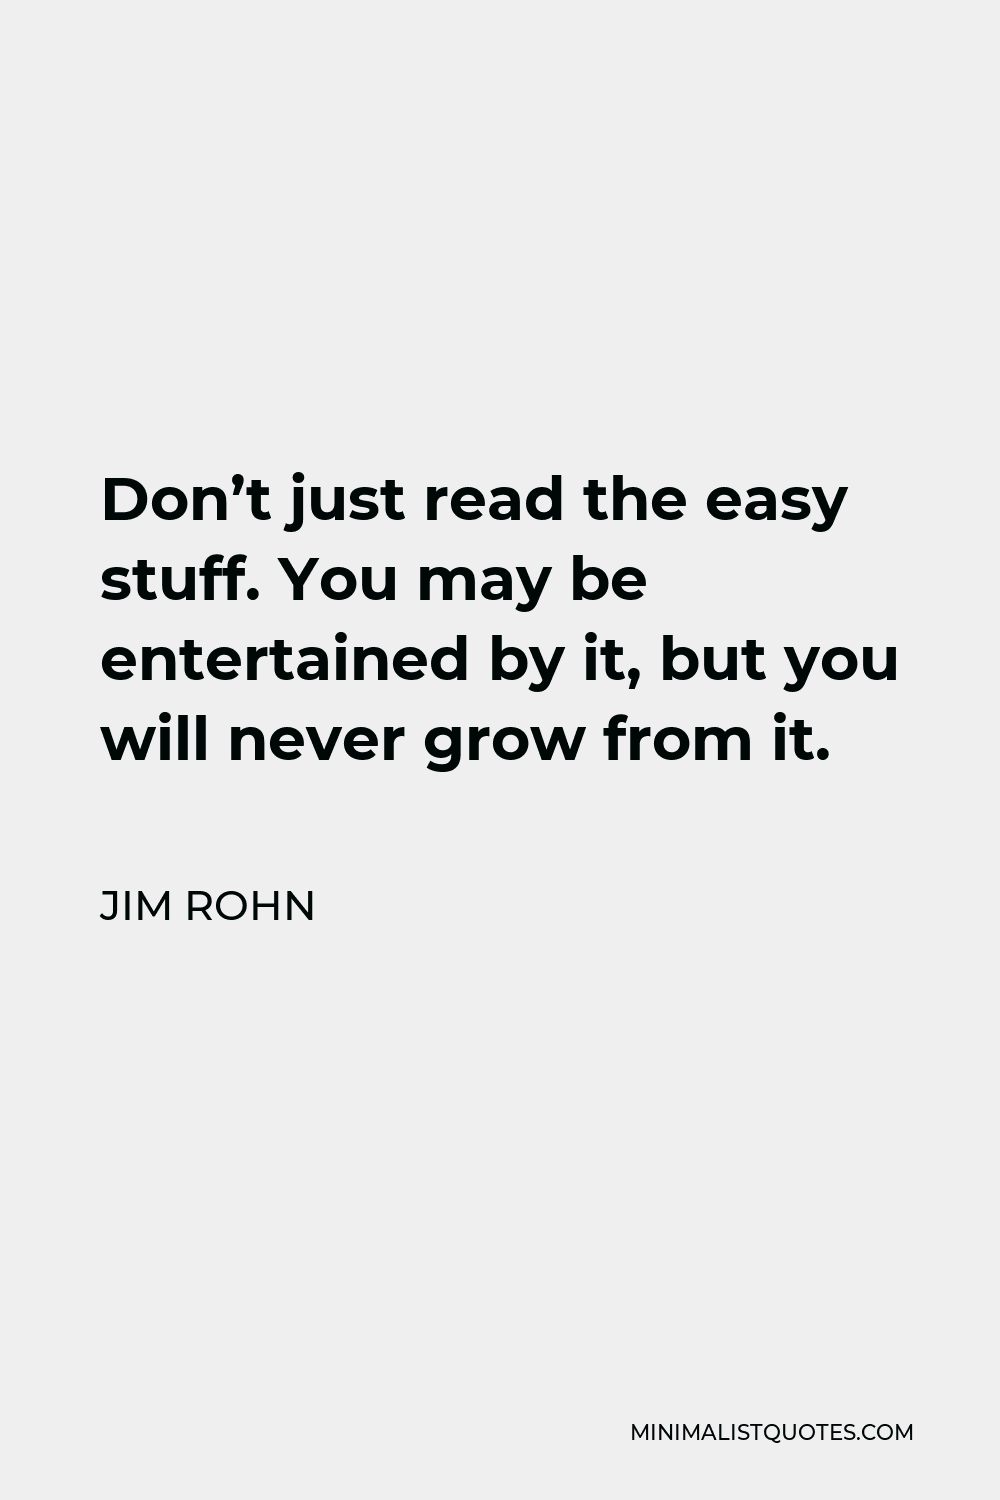 Jim Rohn Quote - Don’t just read the easy stuff. You may be entertained by it, but you will never grow from it.